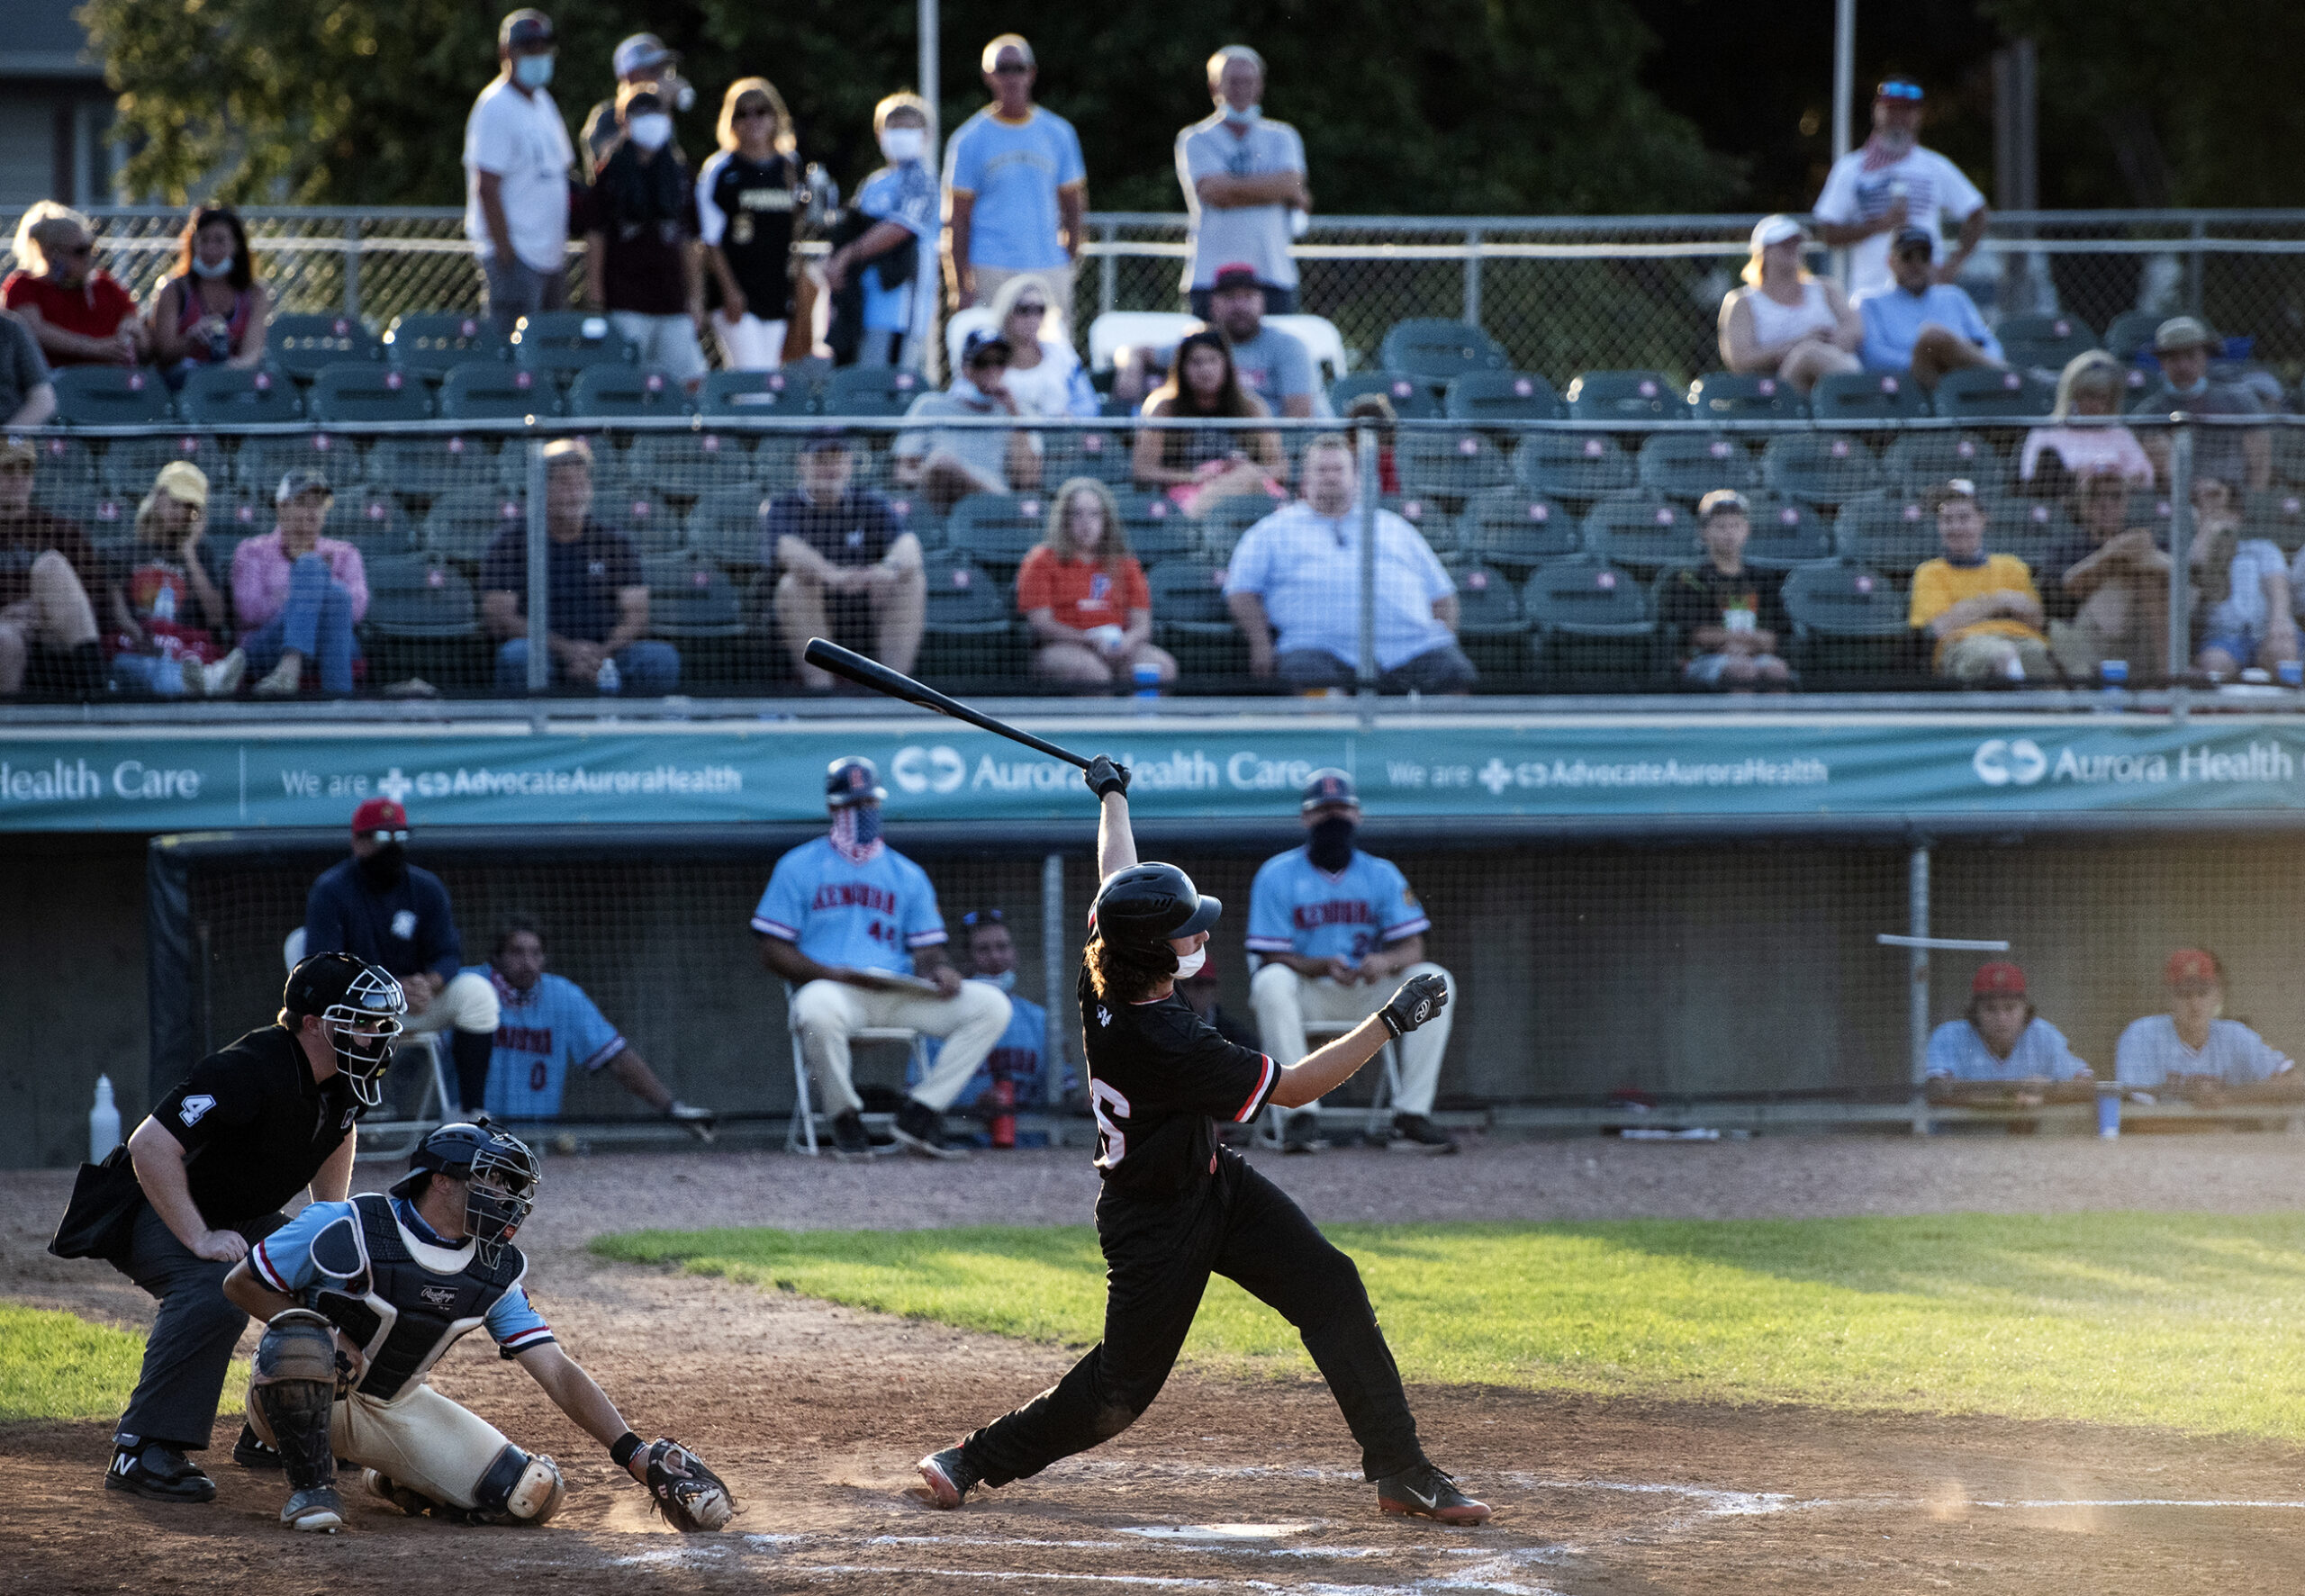 a baseball player in a mask takes a swing as people watch from the stands